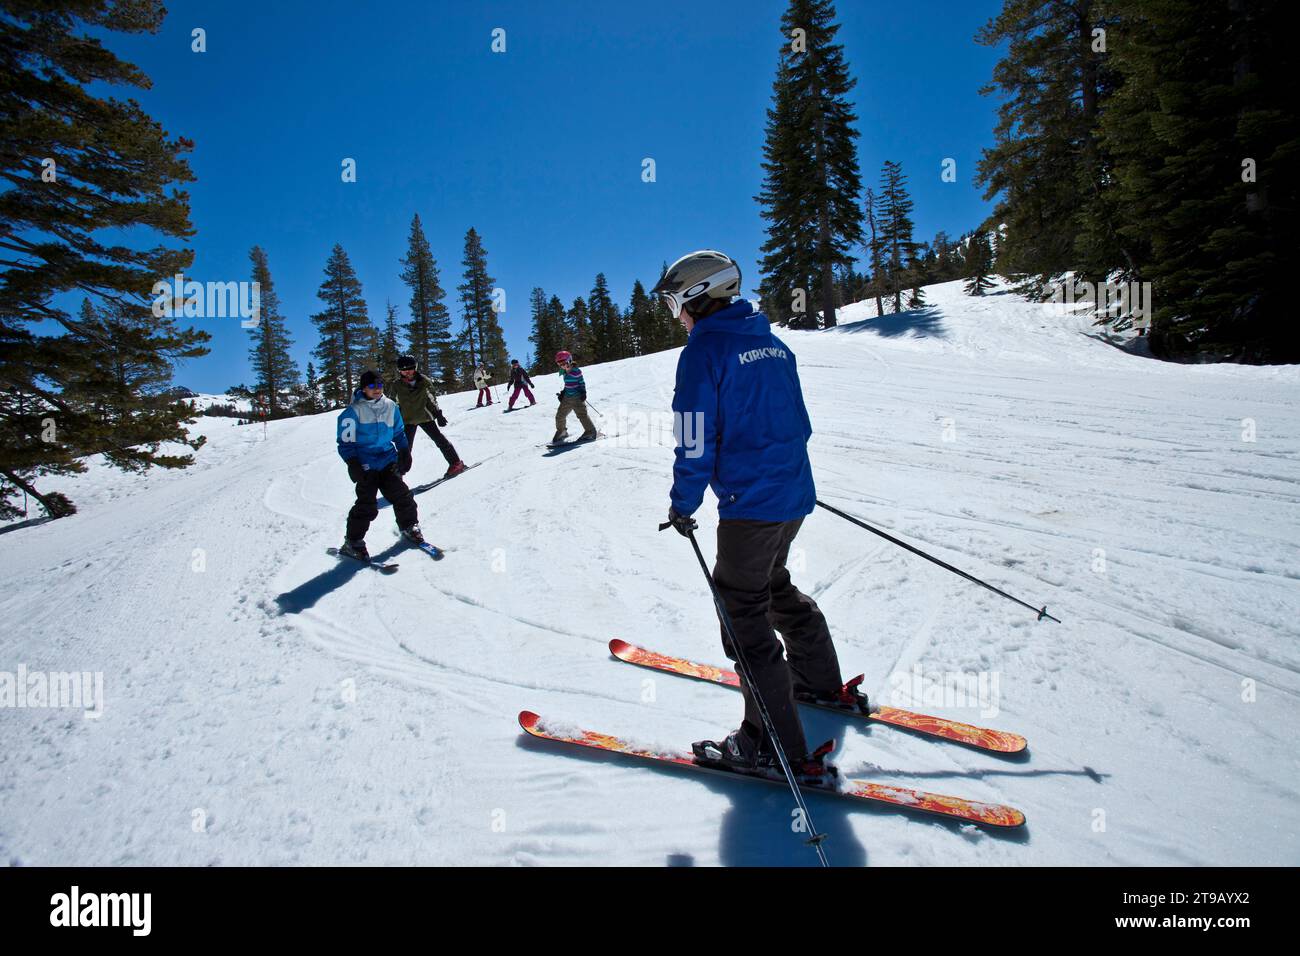 Ski Instructor helping five young skiers on a bunny slope. Stock Photo